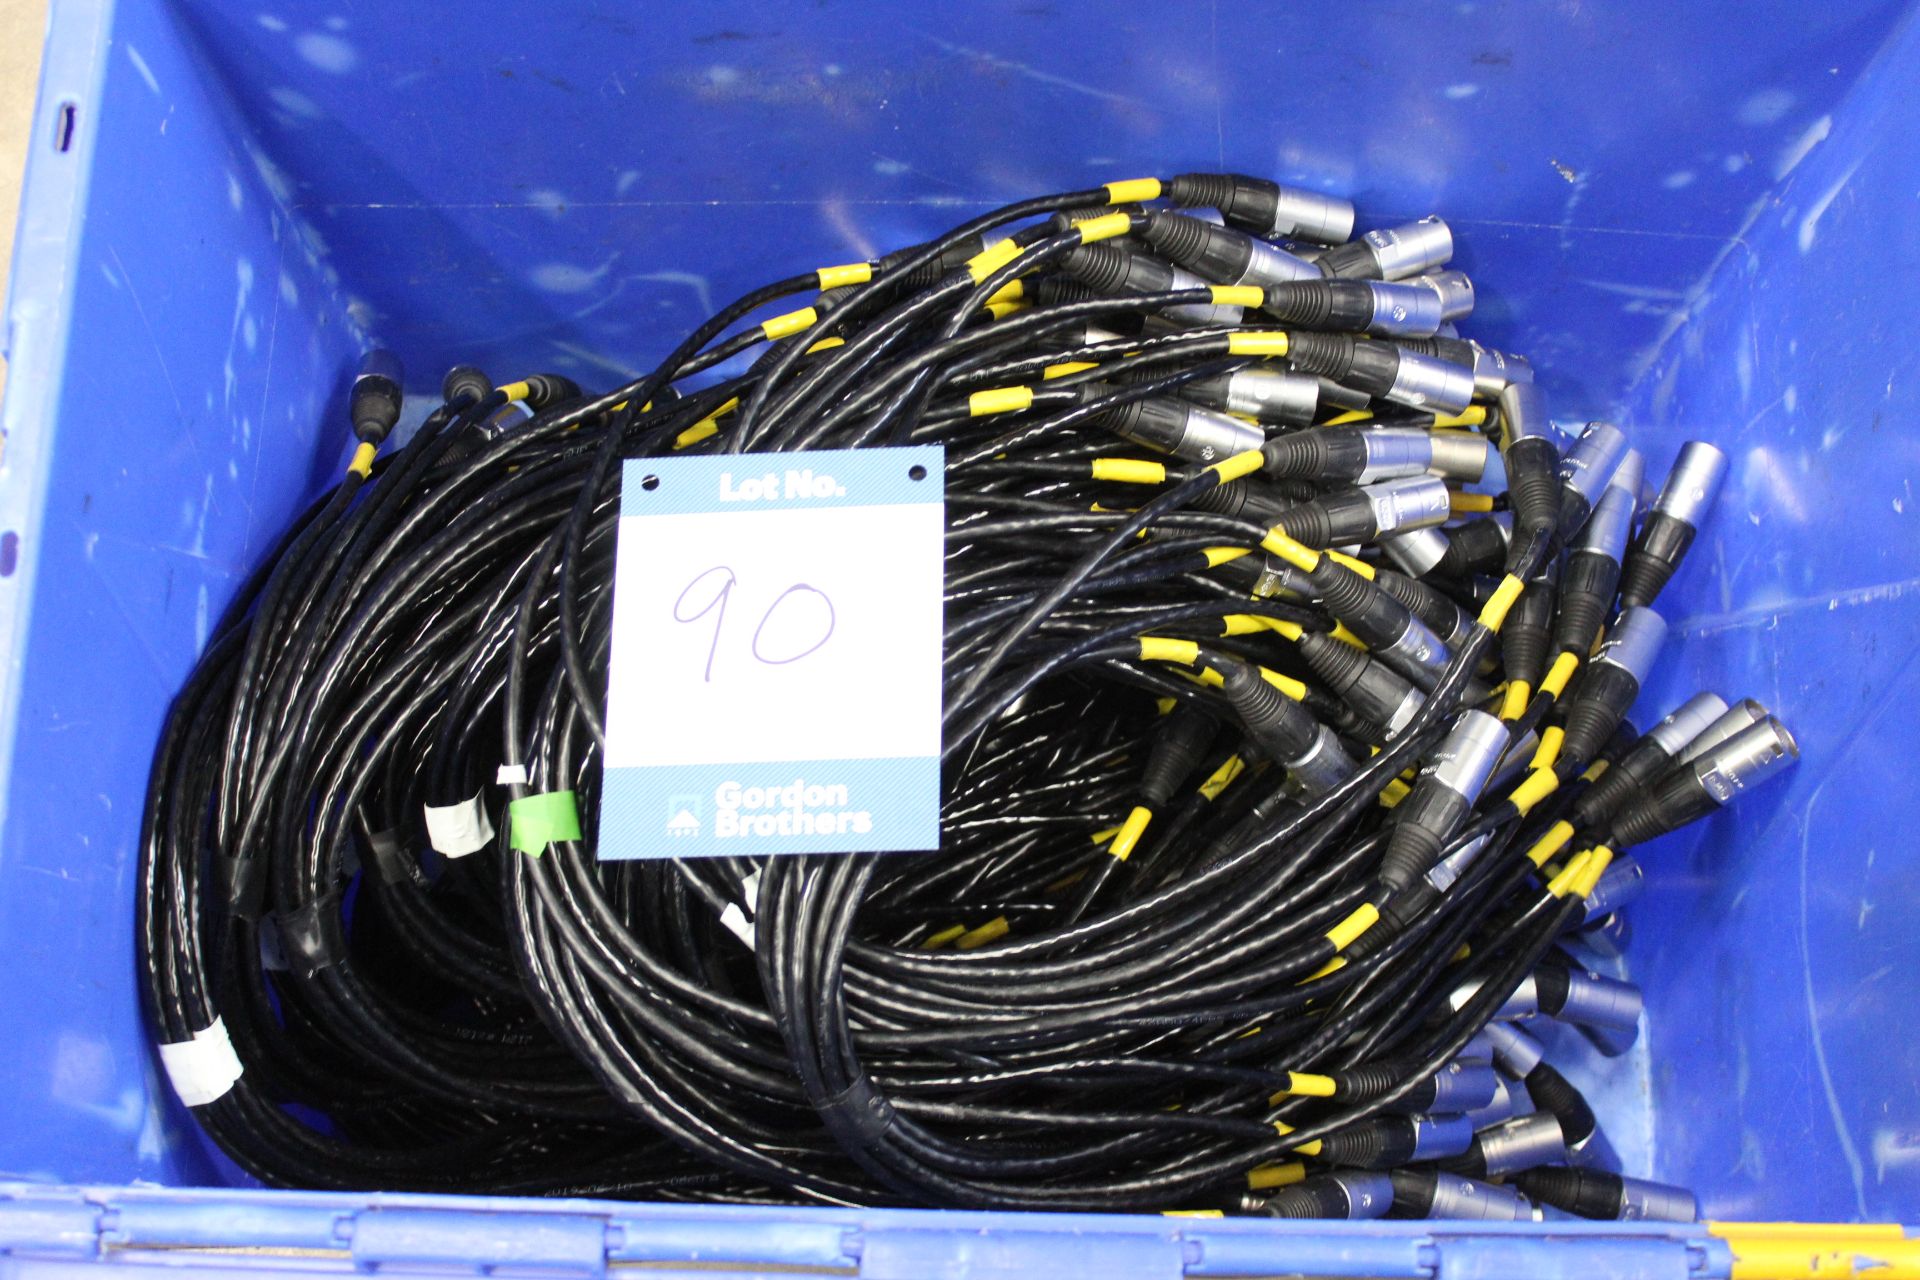 Approx. 284x 0.9m CAT5 cables in 600mm x 400mm plastic tote bin used for P2.86 LED display. (